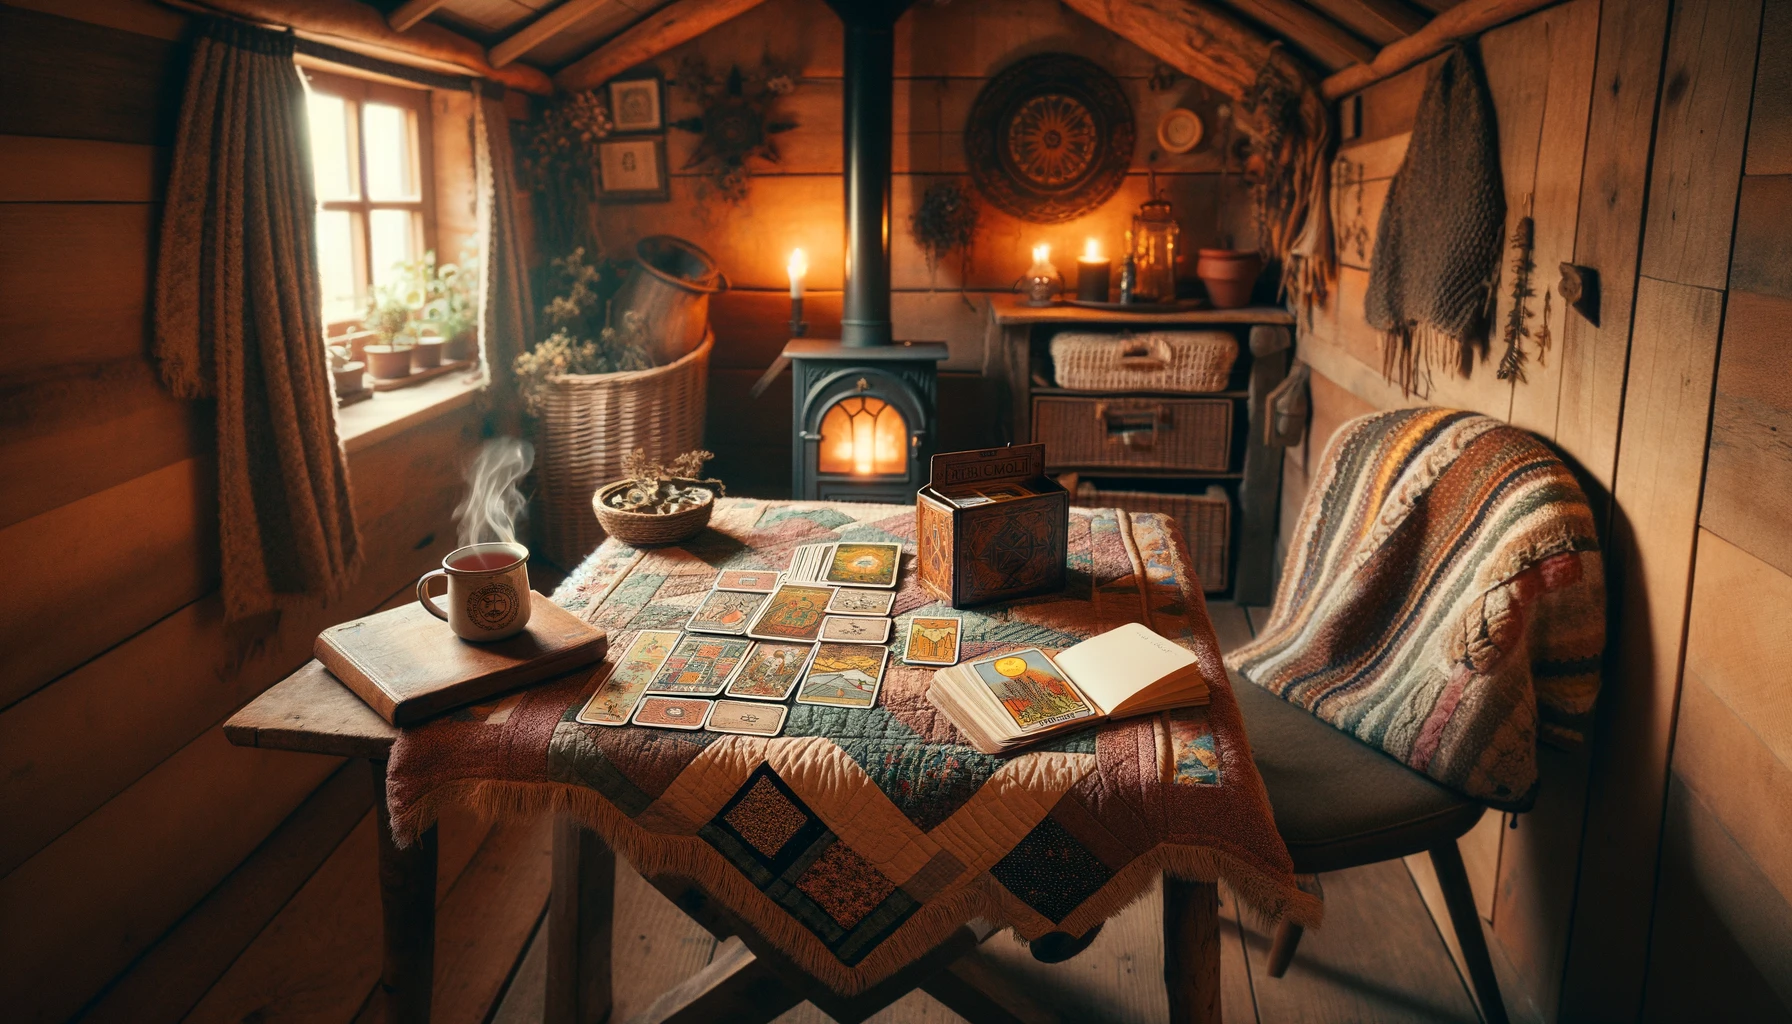 A cozy and inviting tarot reading nook, set within a small, warmly lit cabin